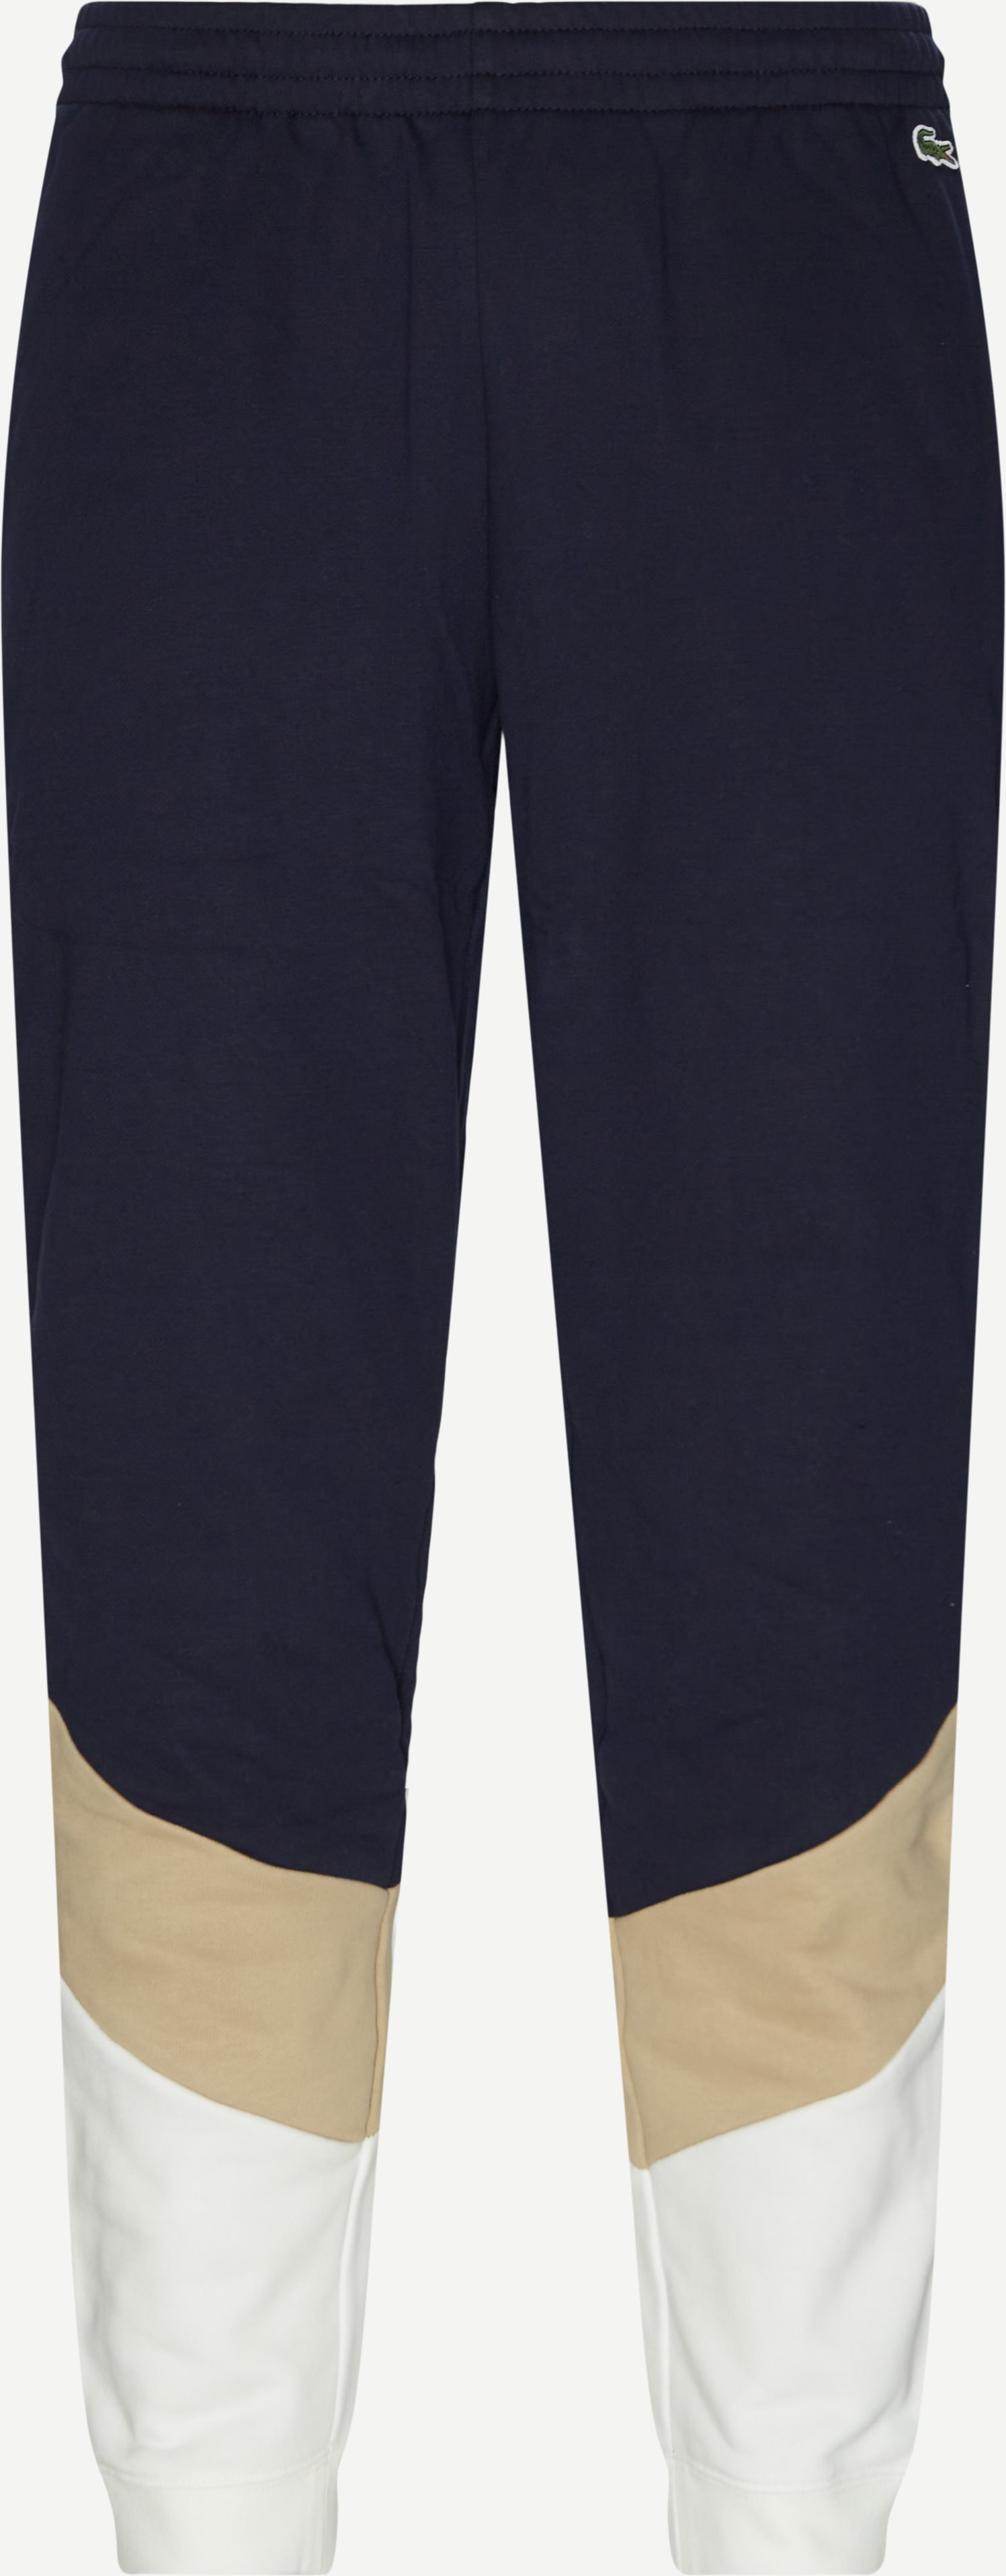 Signature Striped Colorblock Fleece Jogging Pants - Trousers - Tapered fit - Blue